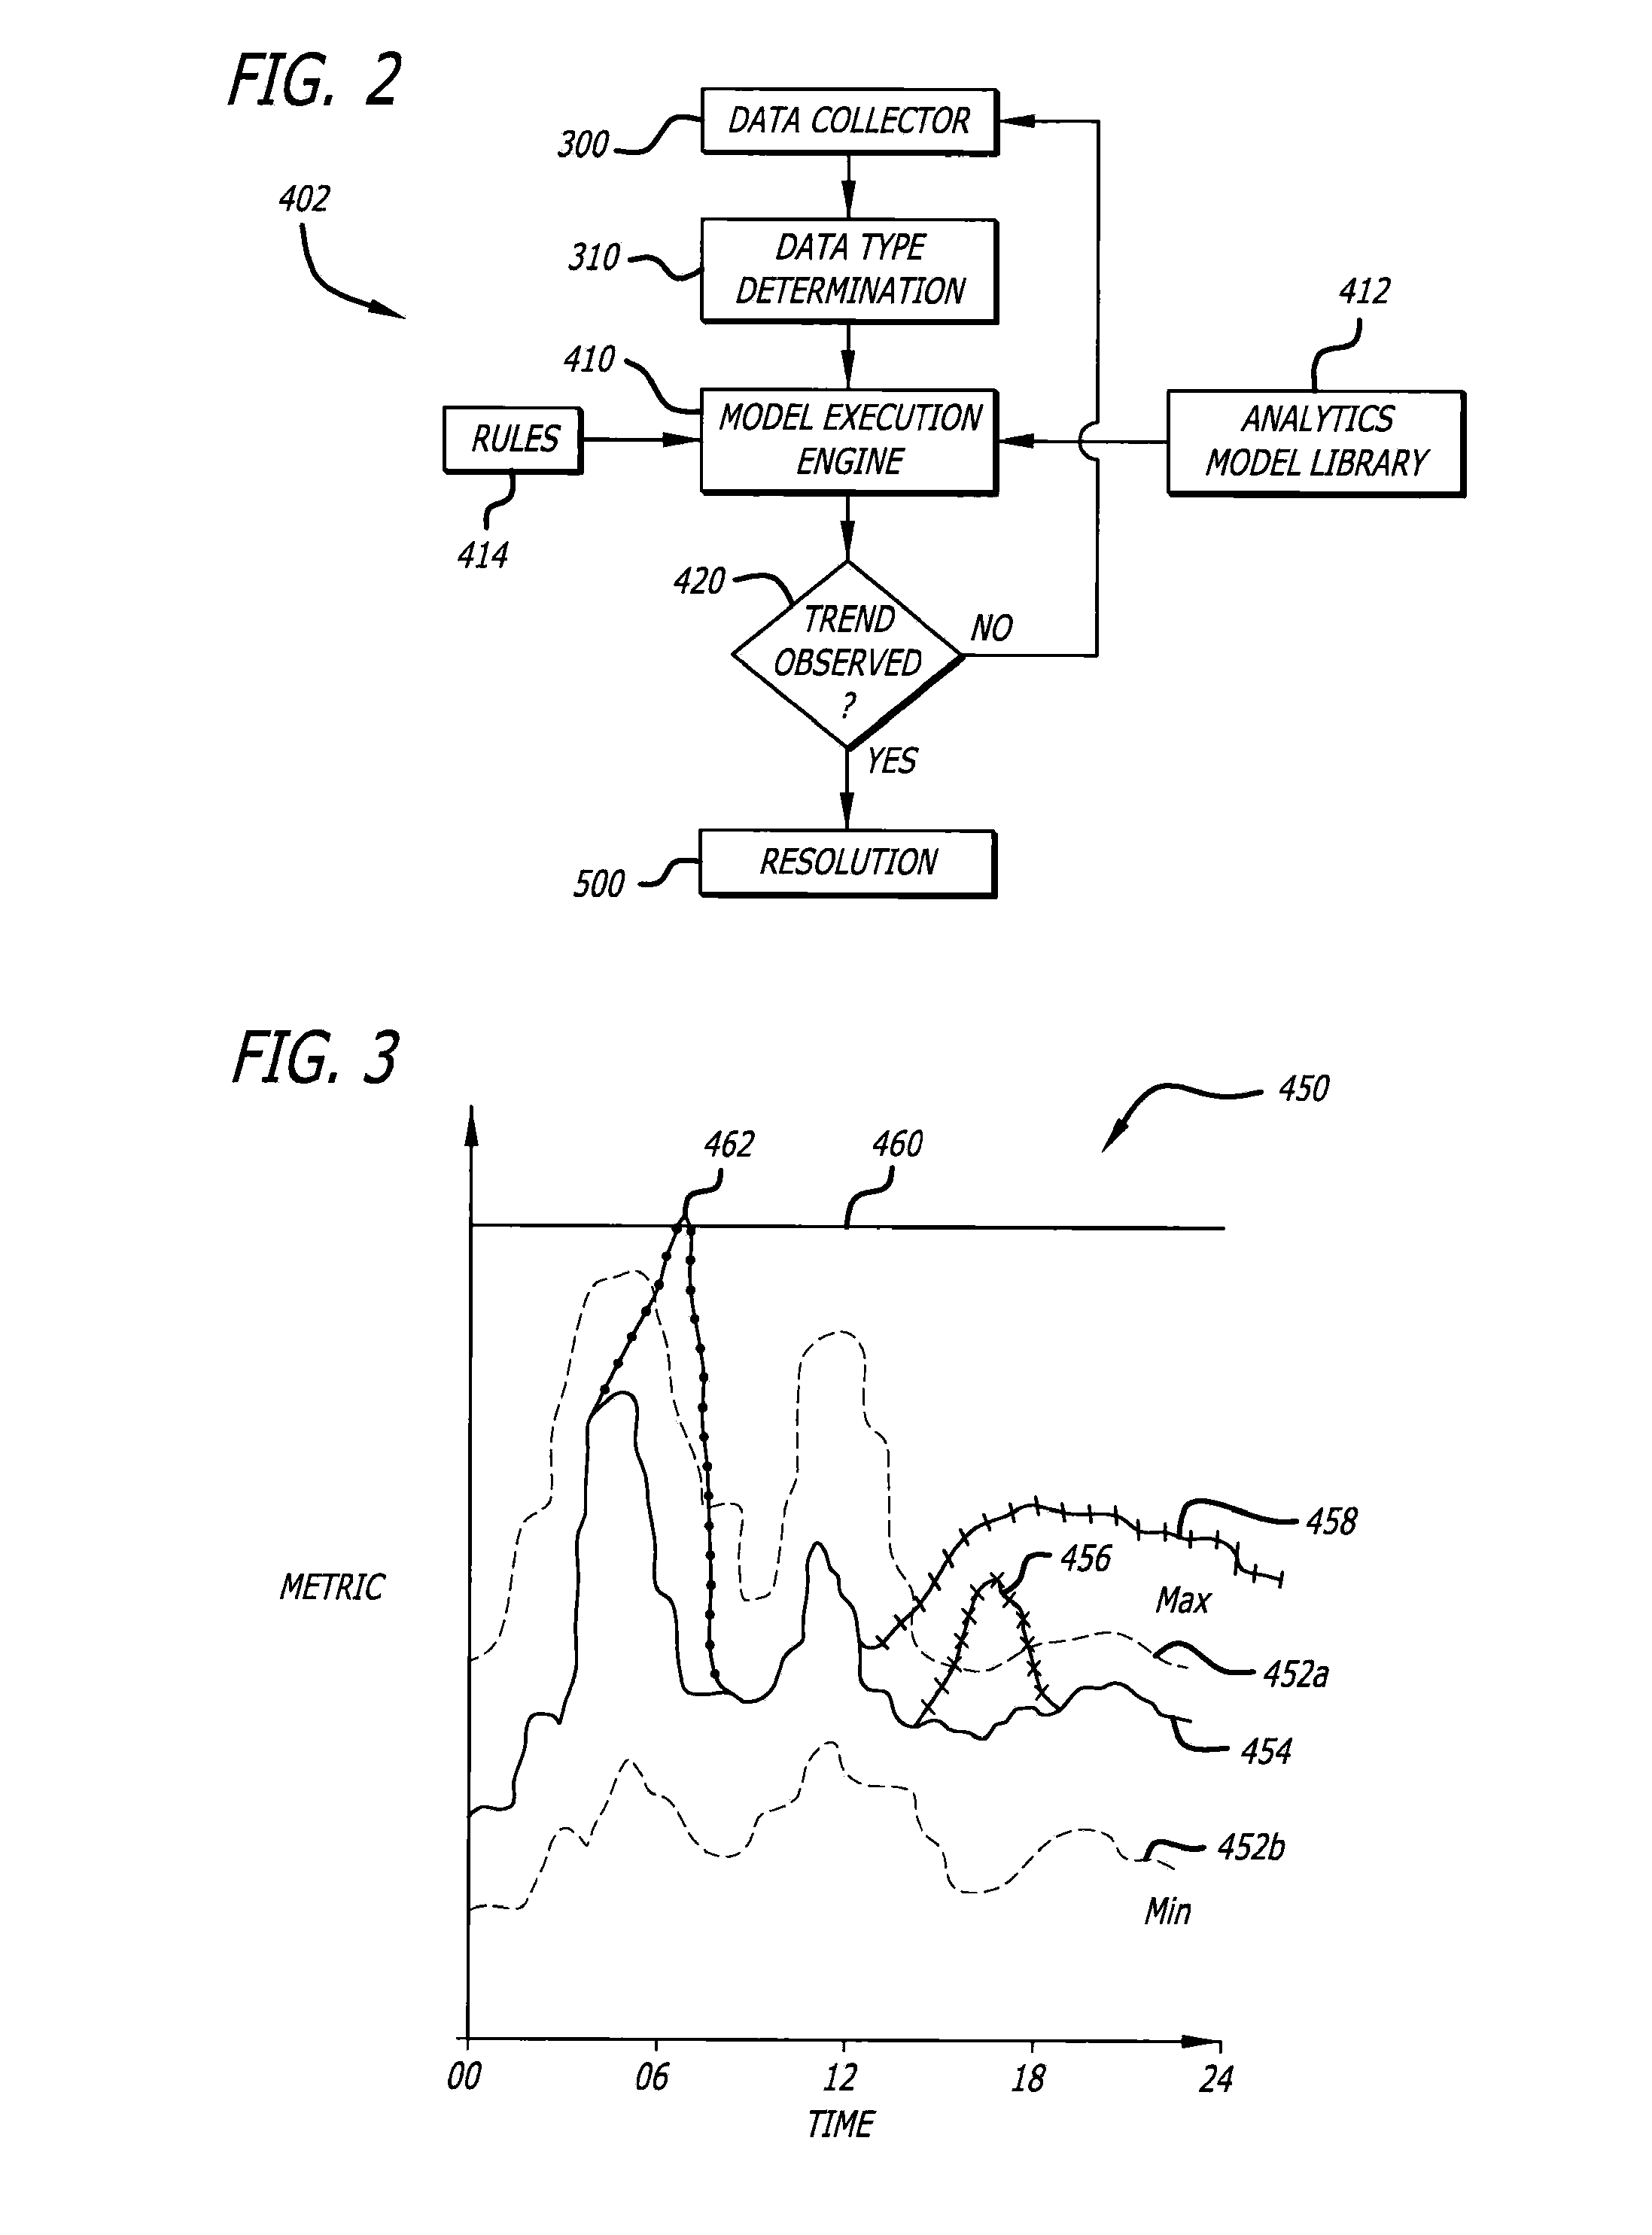 Self-learning integrity management system and related methods